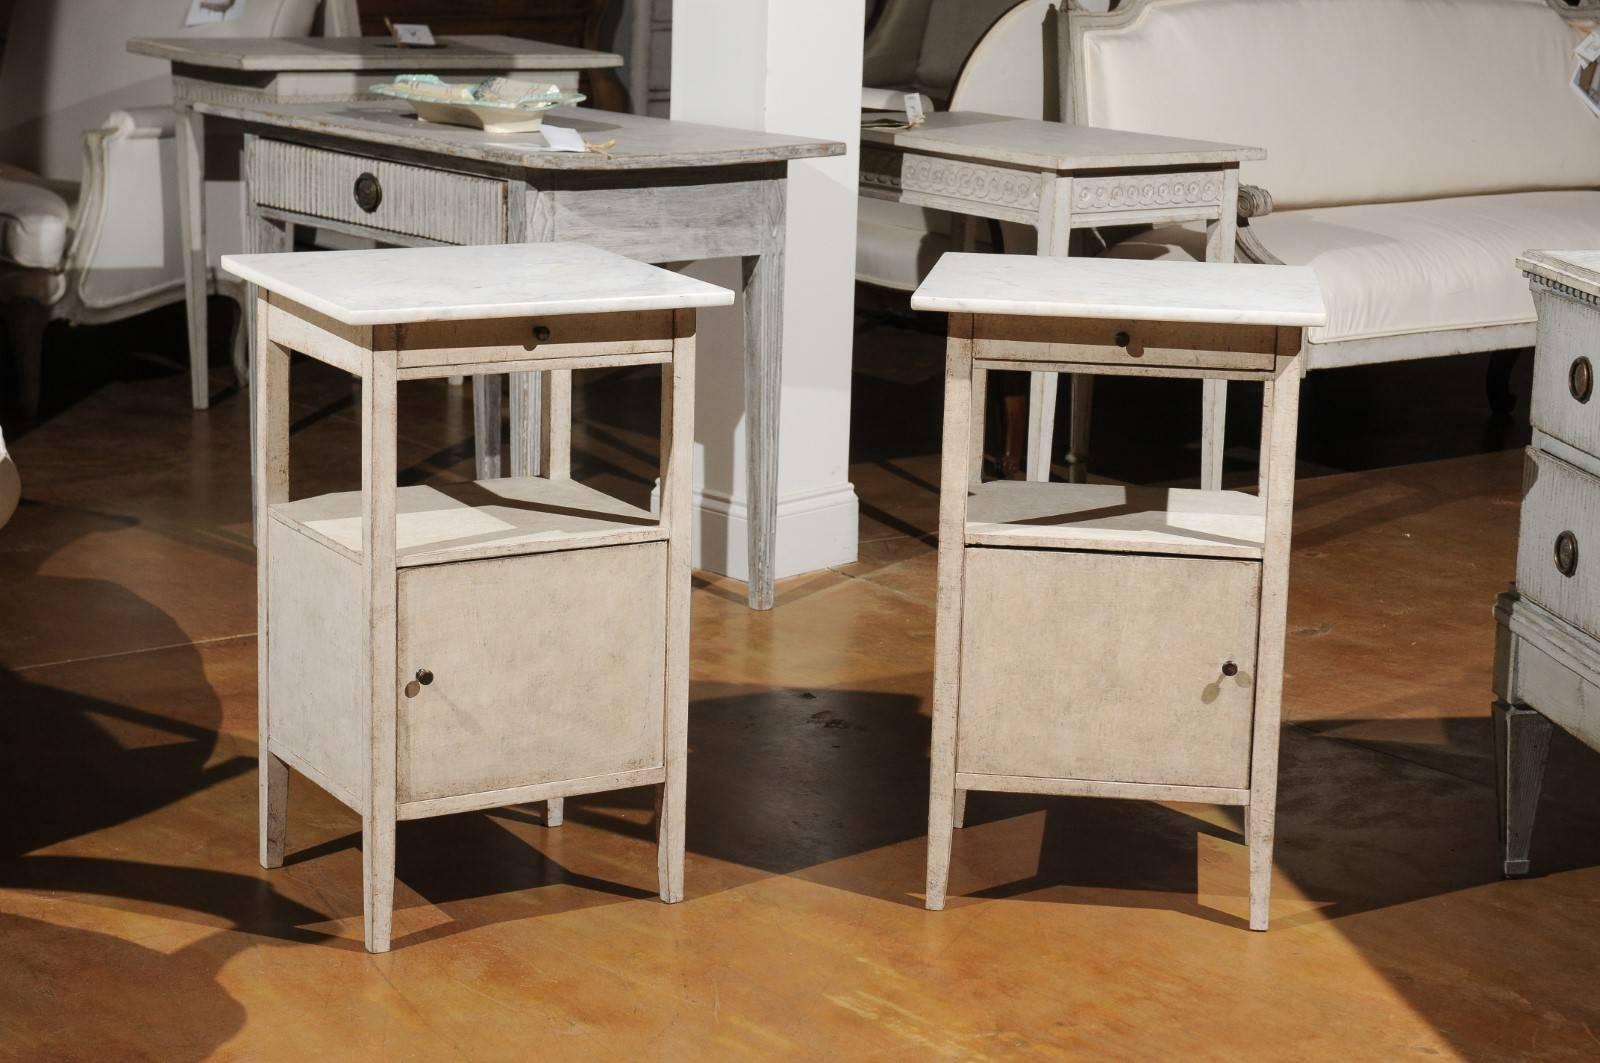 A pair of Swedish painted wood bedside tables from the early 20th century with white veined marble tops, single drawers, open shelved and lower doors. Each of this pair of Swedish beside tables features a rectangular white marble top, overhanging a